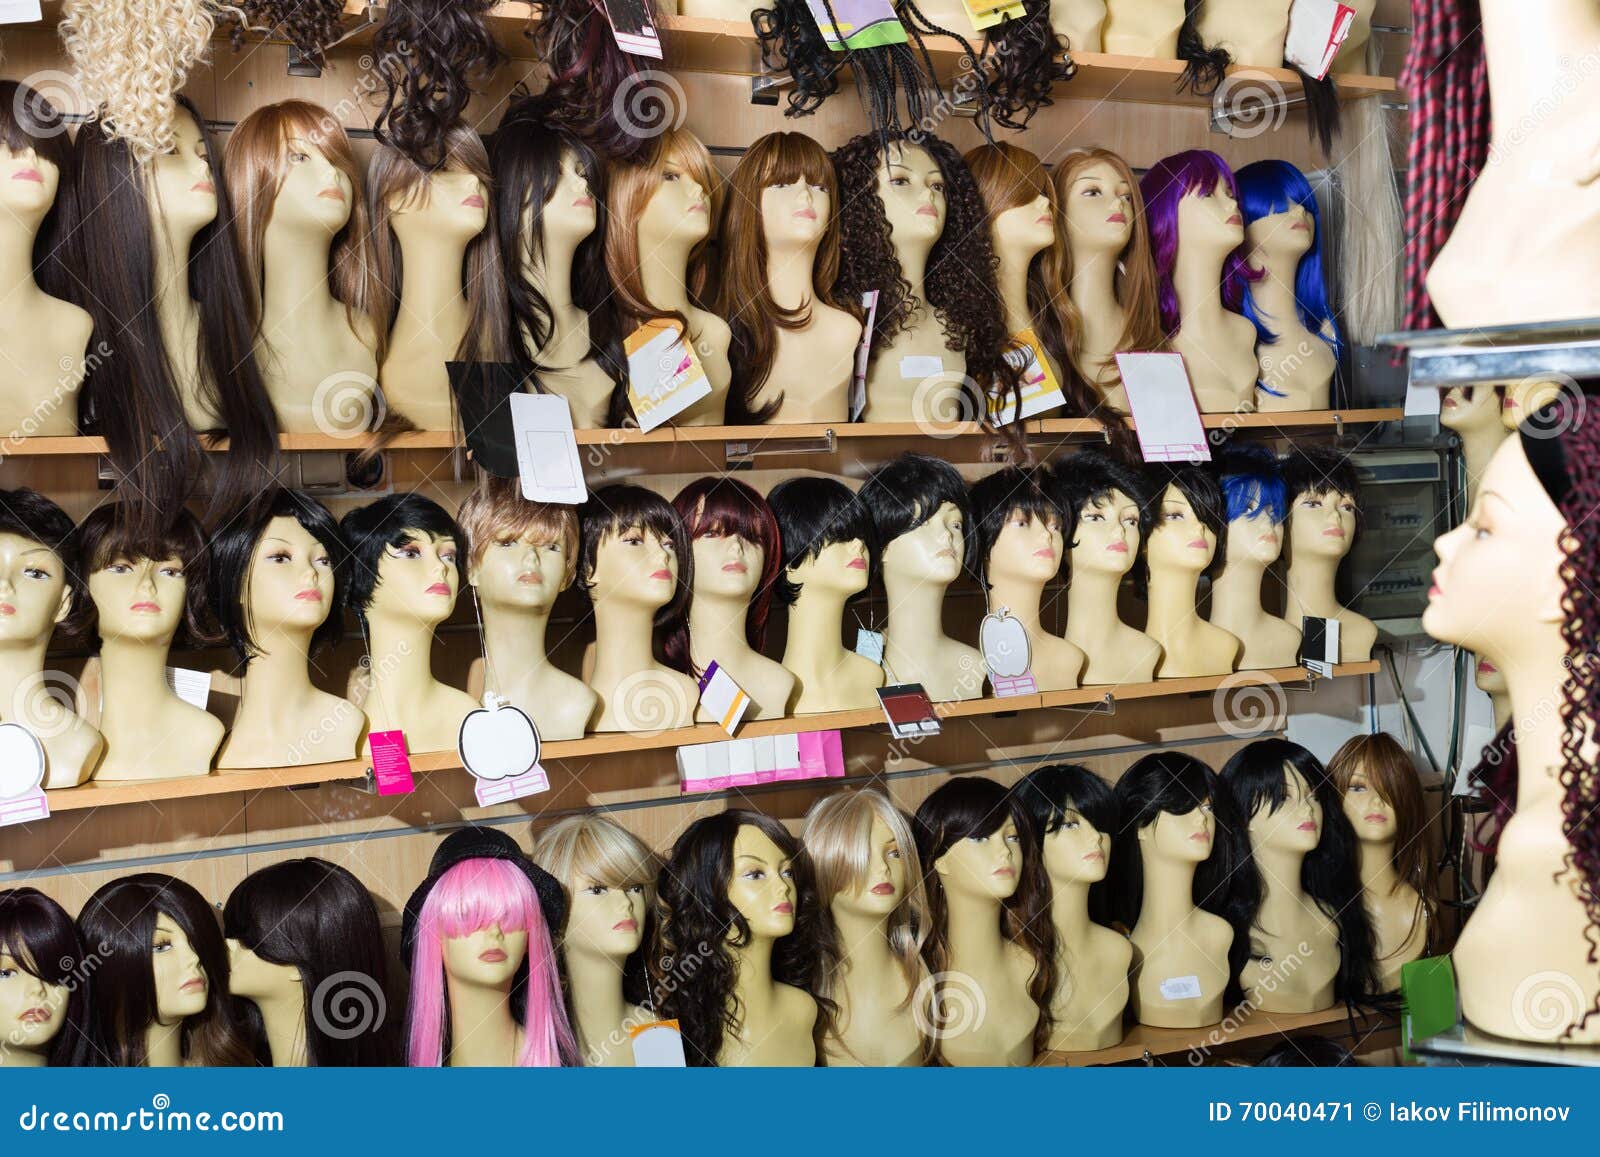 Dummies Heads with Hair Style in Shop Stock Image - Image of boutique,  mannequins: 70040471